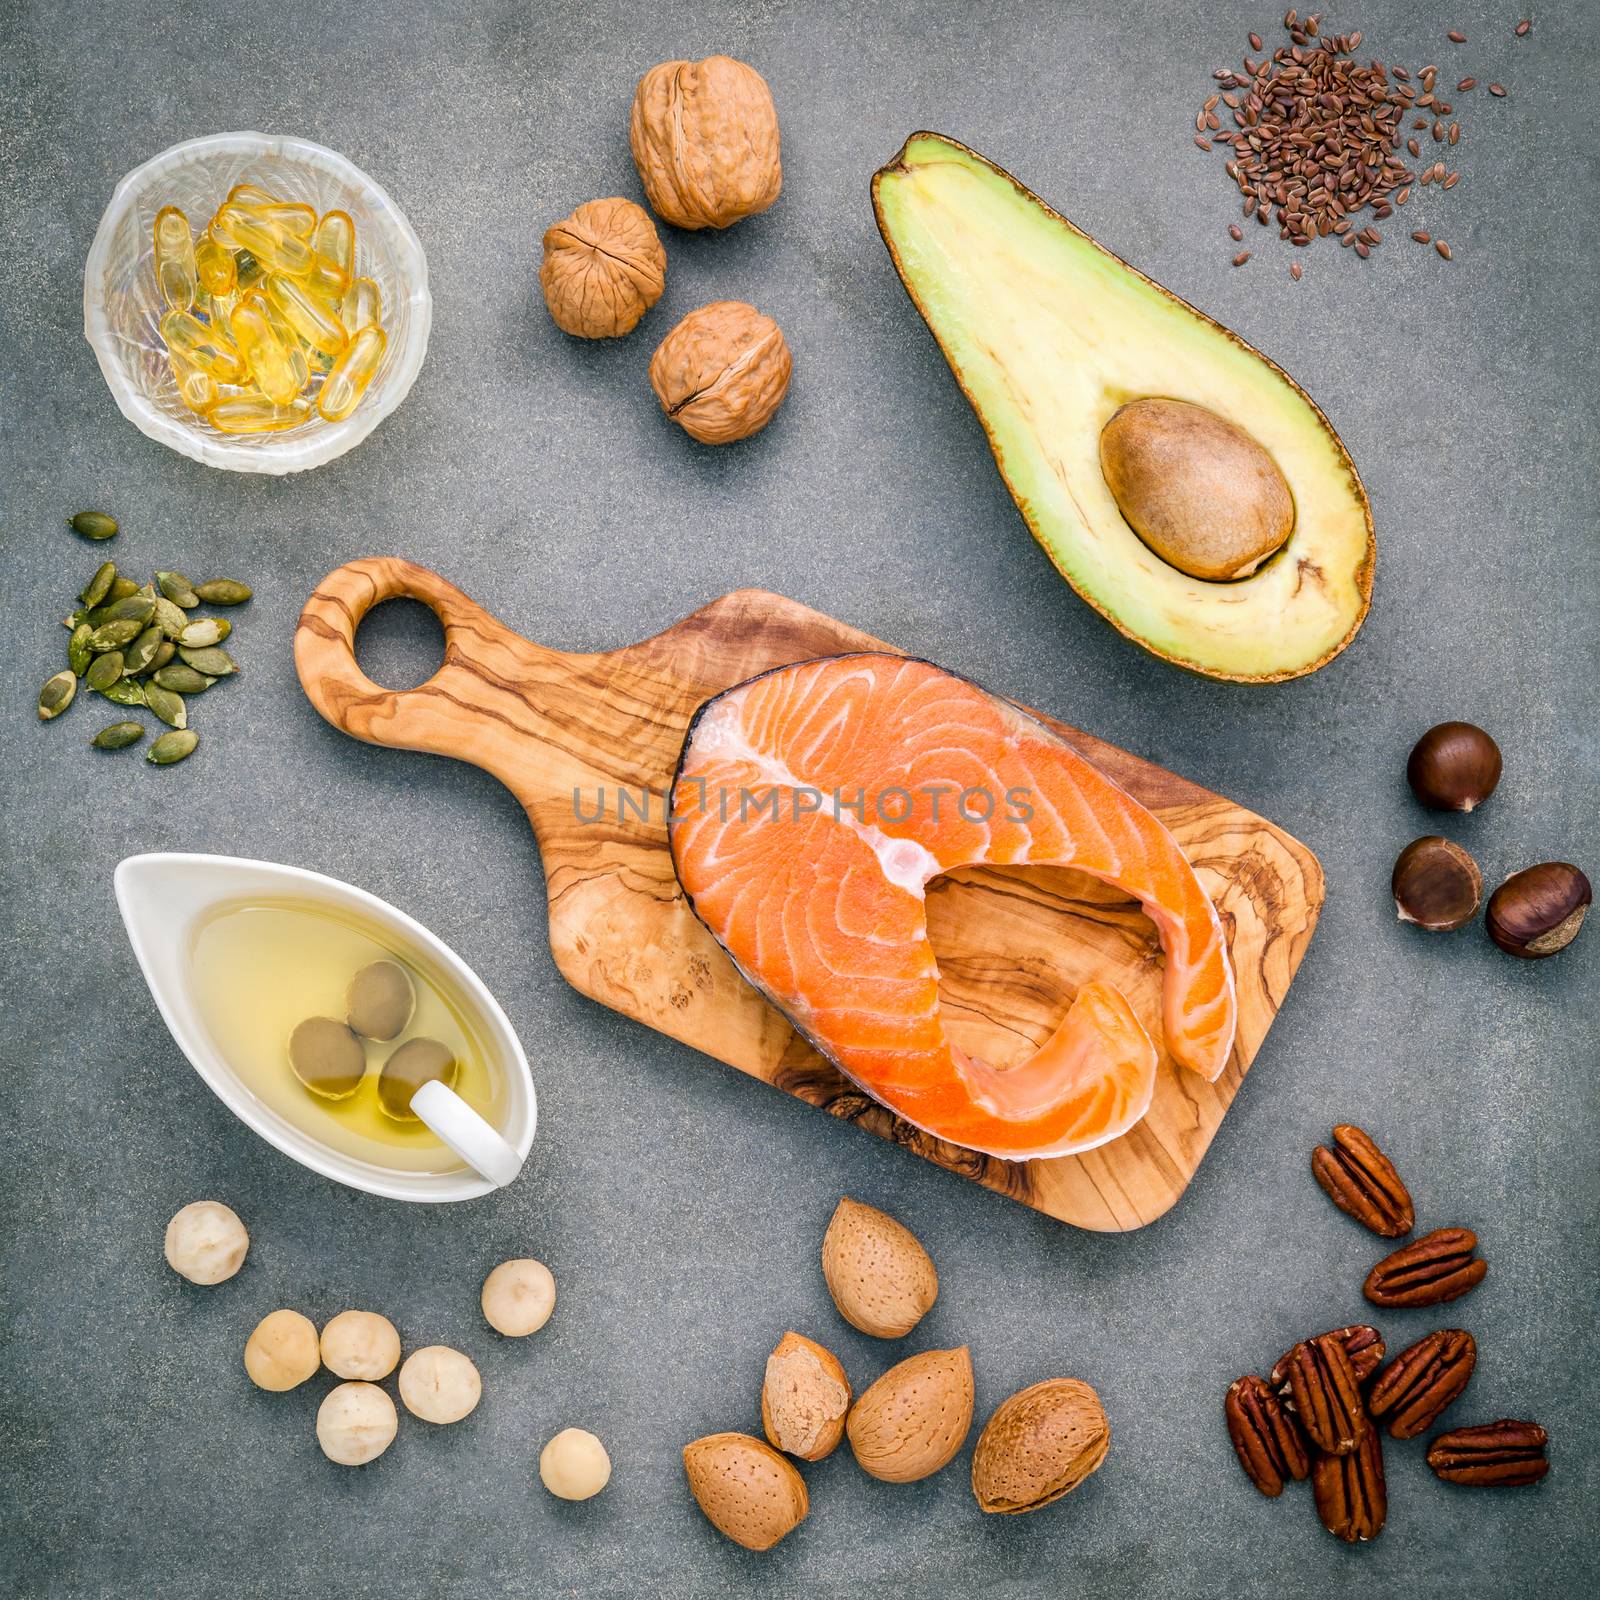 Selection food sources of omega 3 and unsaturated fats. Super food high omega 3 and unsaturated fats for healthy food. Almond ,pecan ,hazelnuts,walnuts ,olive oil ,fish oil ,salmon and avocado .